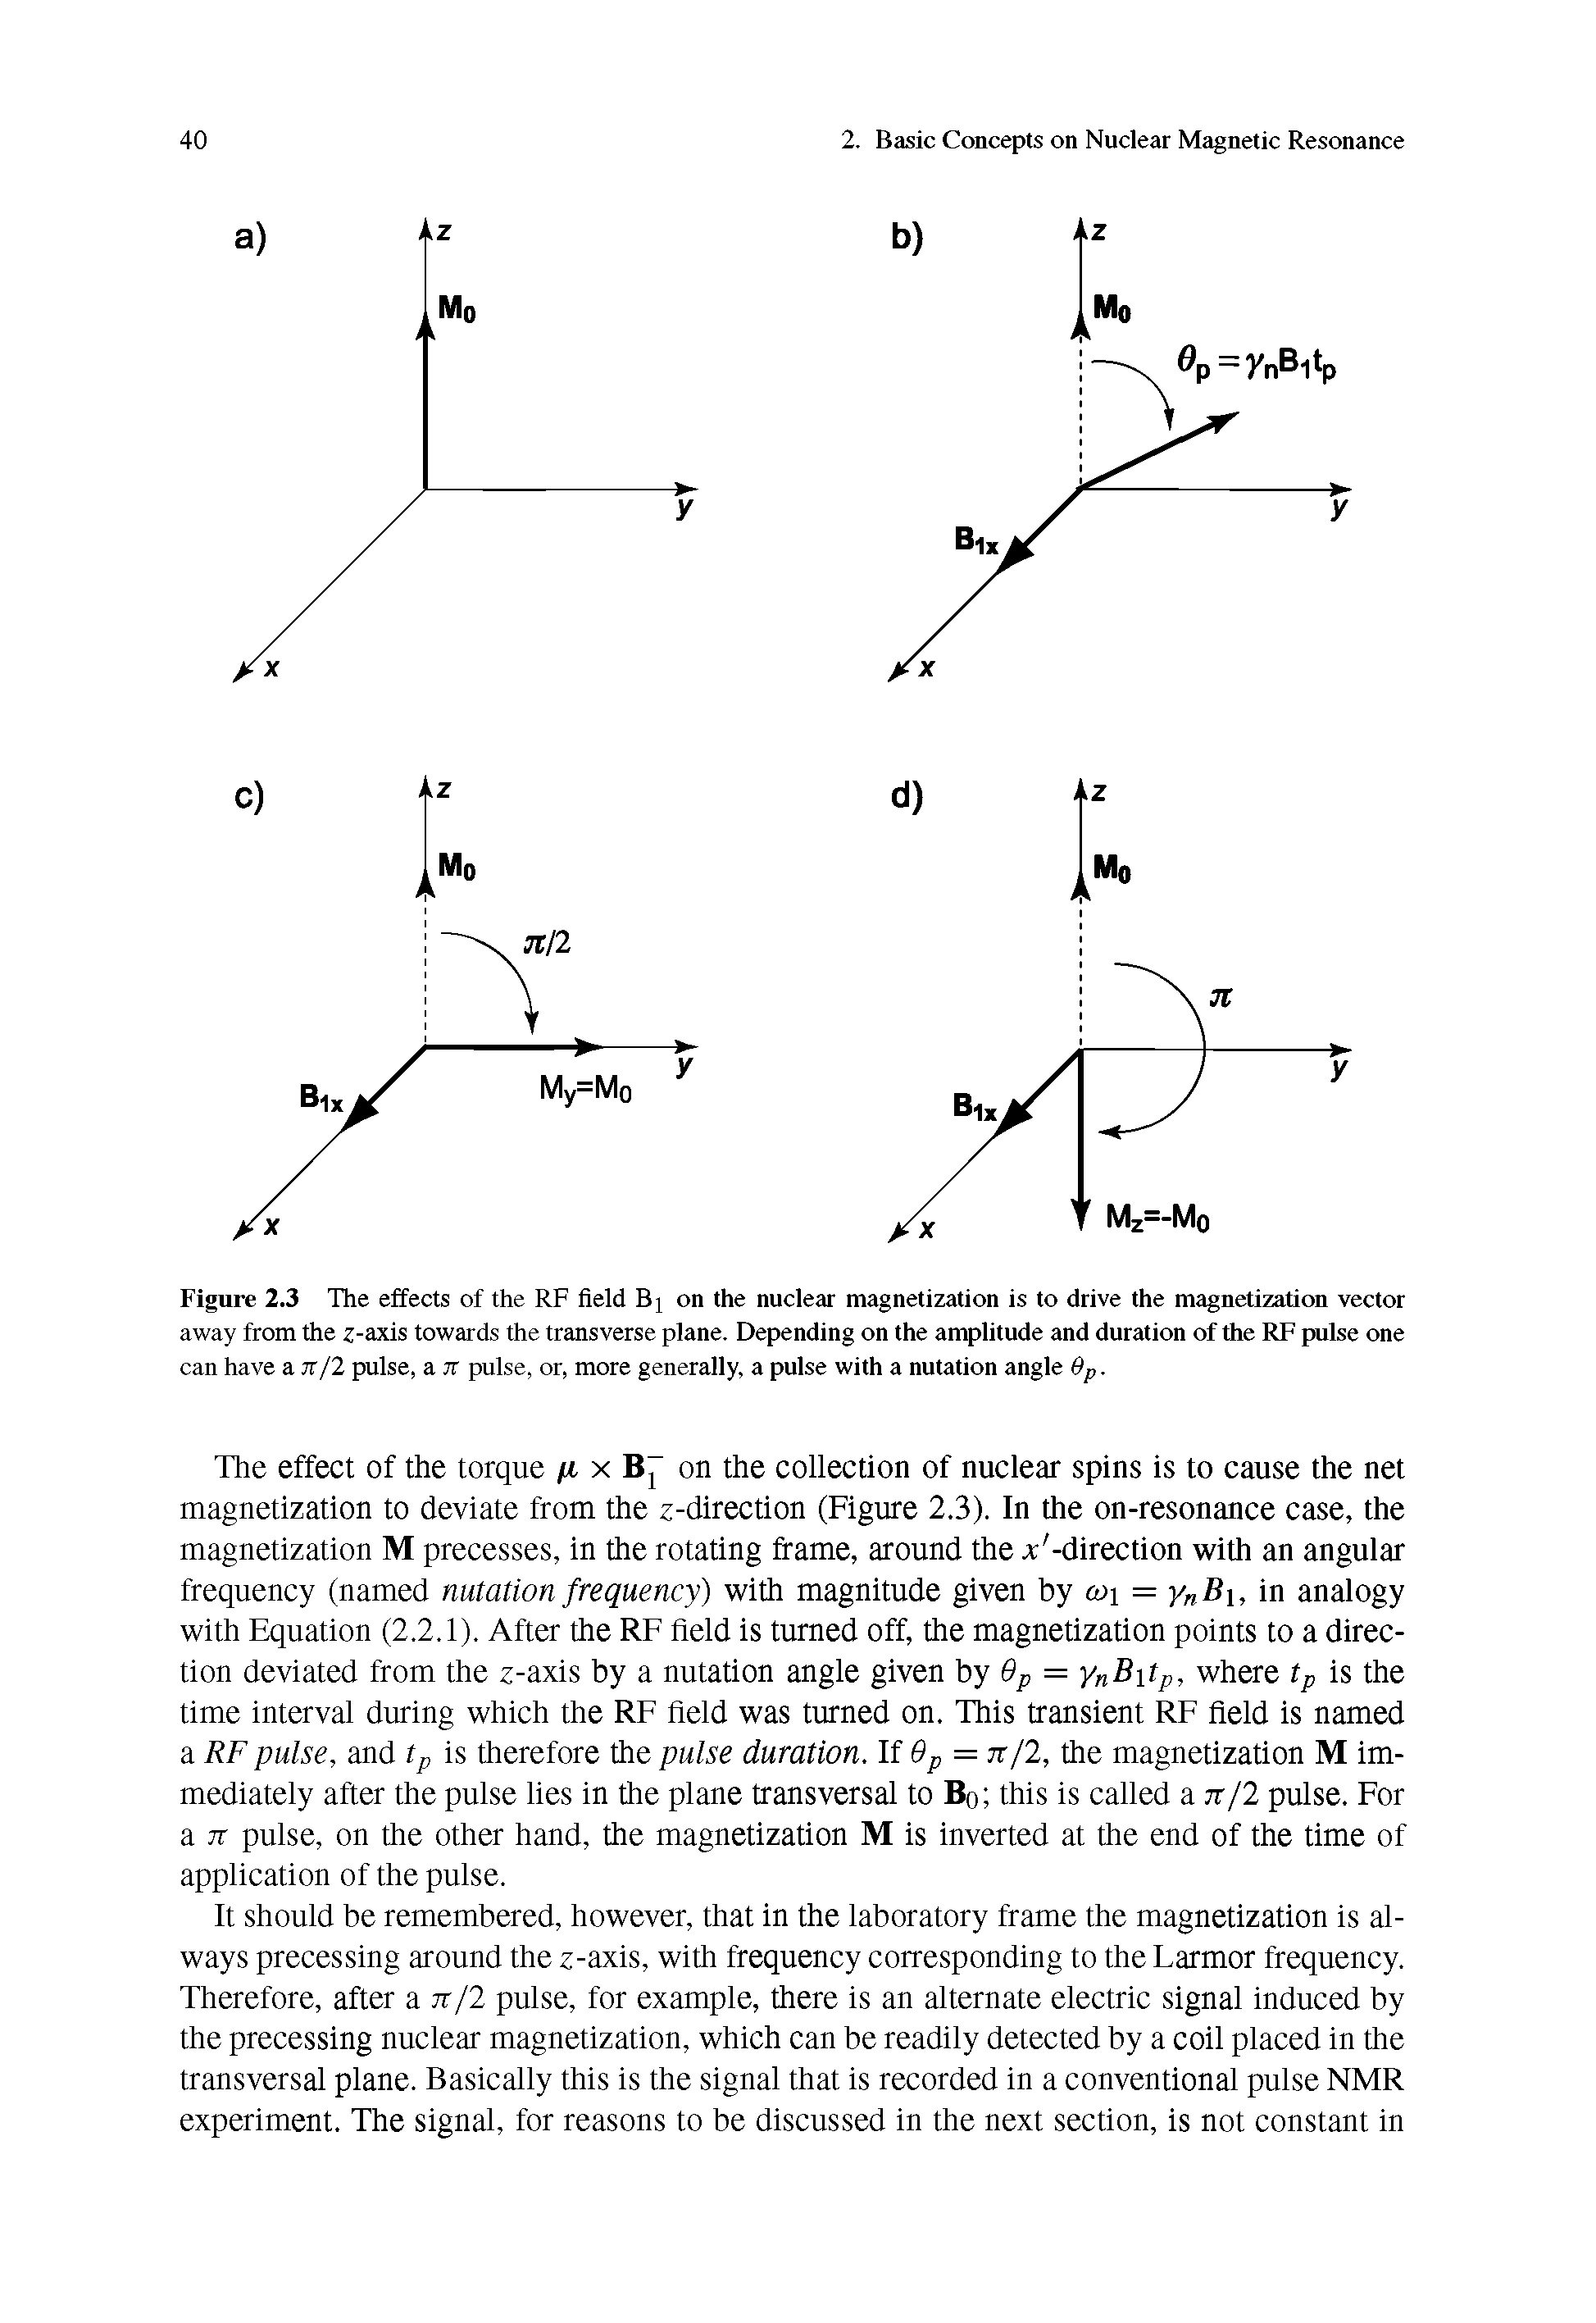 Figure 2.3 The effects of the RF field Bj on the nuclear magnetization is to drive the magnetization vector away from the z-axis towards the transverse plane. Depending on the amplitude and duration of the RF pulse one can have a njl pulse, a it pulse, or, more generally, a pulse with a nutation angle Qp.